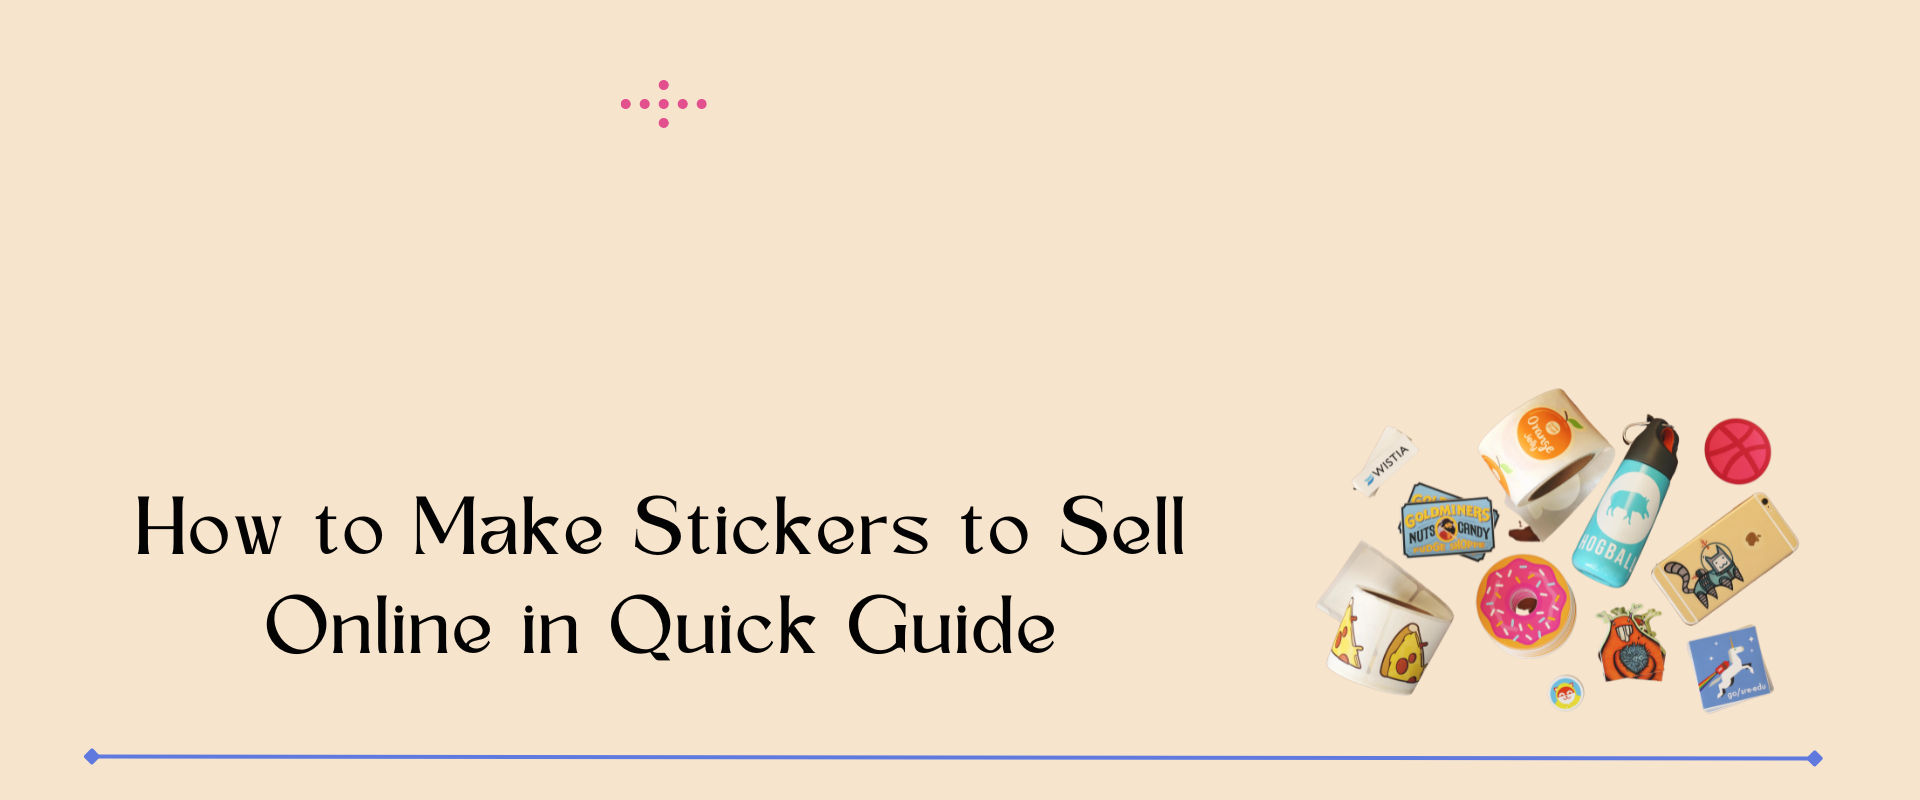 How to Make Stickers to Sell Online in Quick Guide